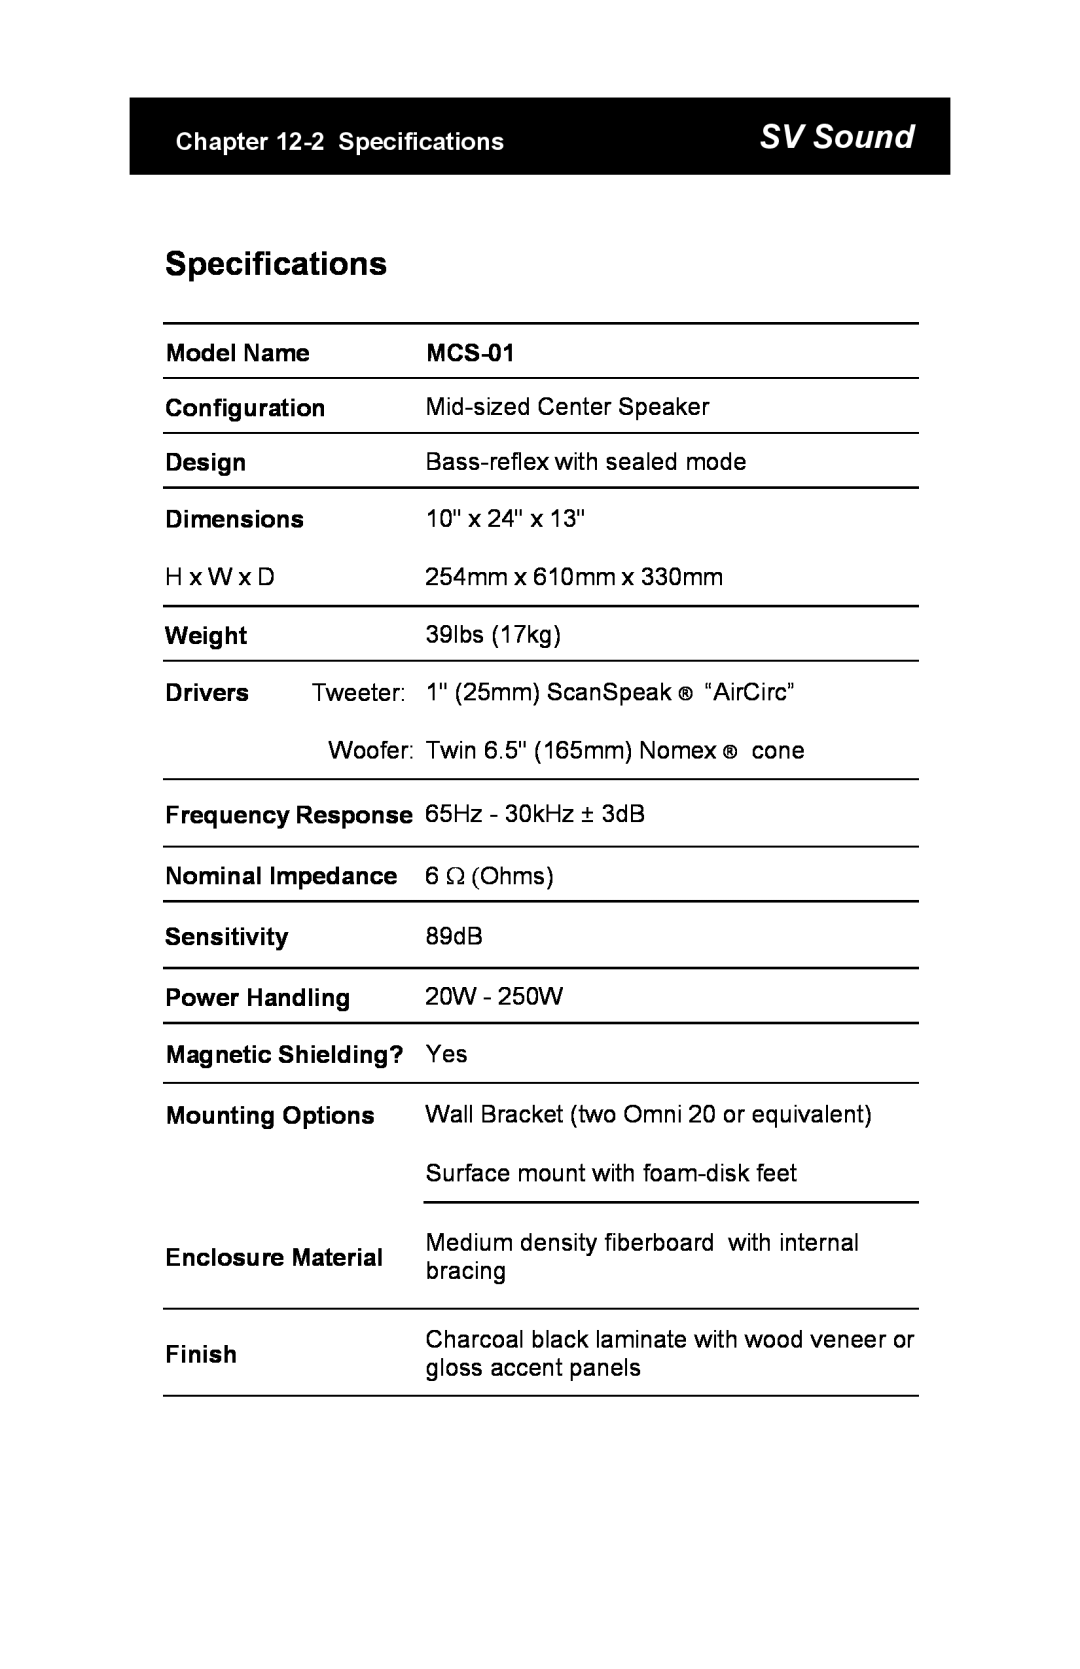 SV Sound SCS-01, MTS-01, SBS-01 specifications SV Sound, 2Specifications 